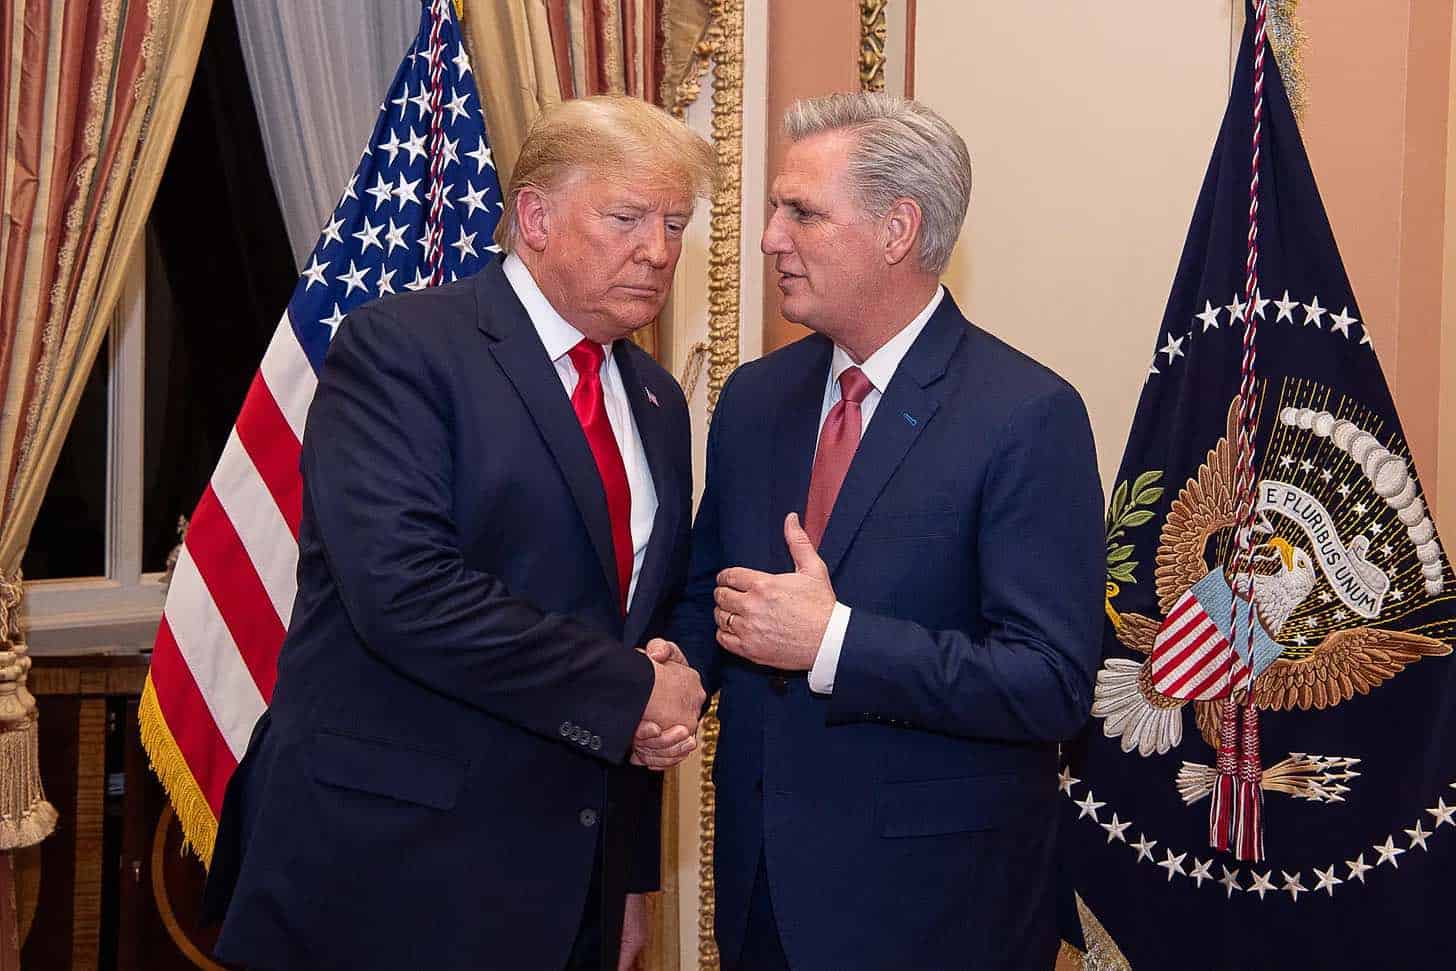 What could possibly go wrong when you go all lovey-dovey on an insurrectionist 30 days after an attempted coup? Photo credit: Office of GOP Leader Kevin McCarthy